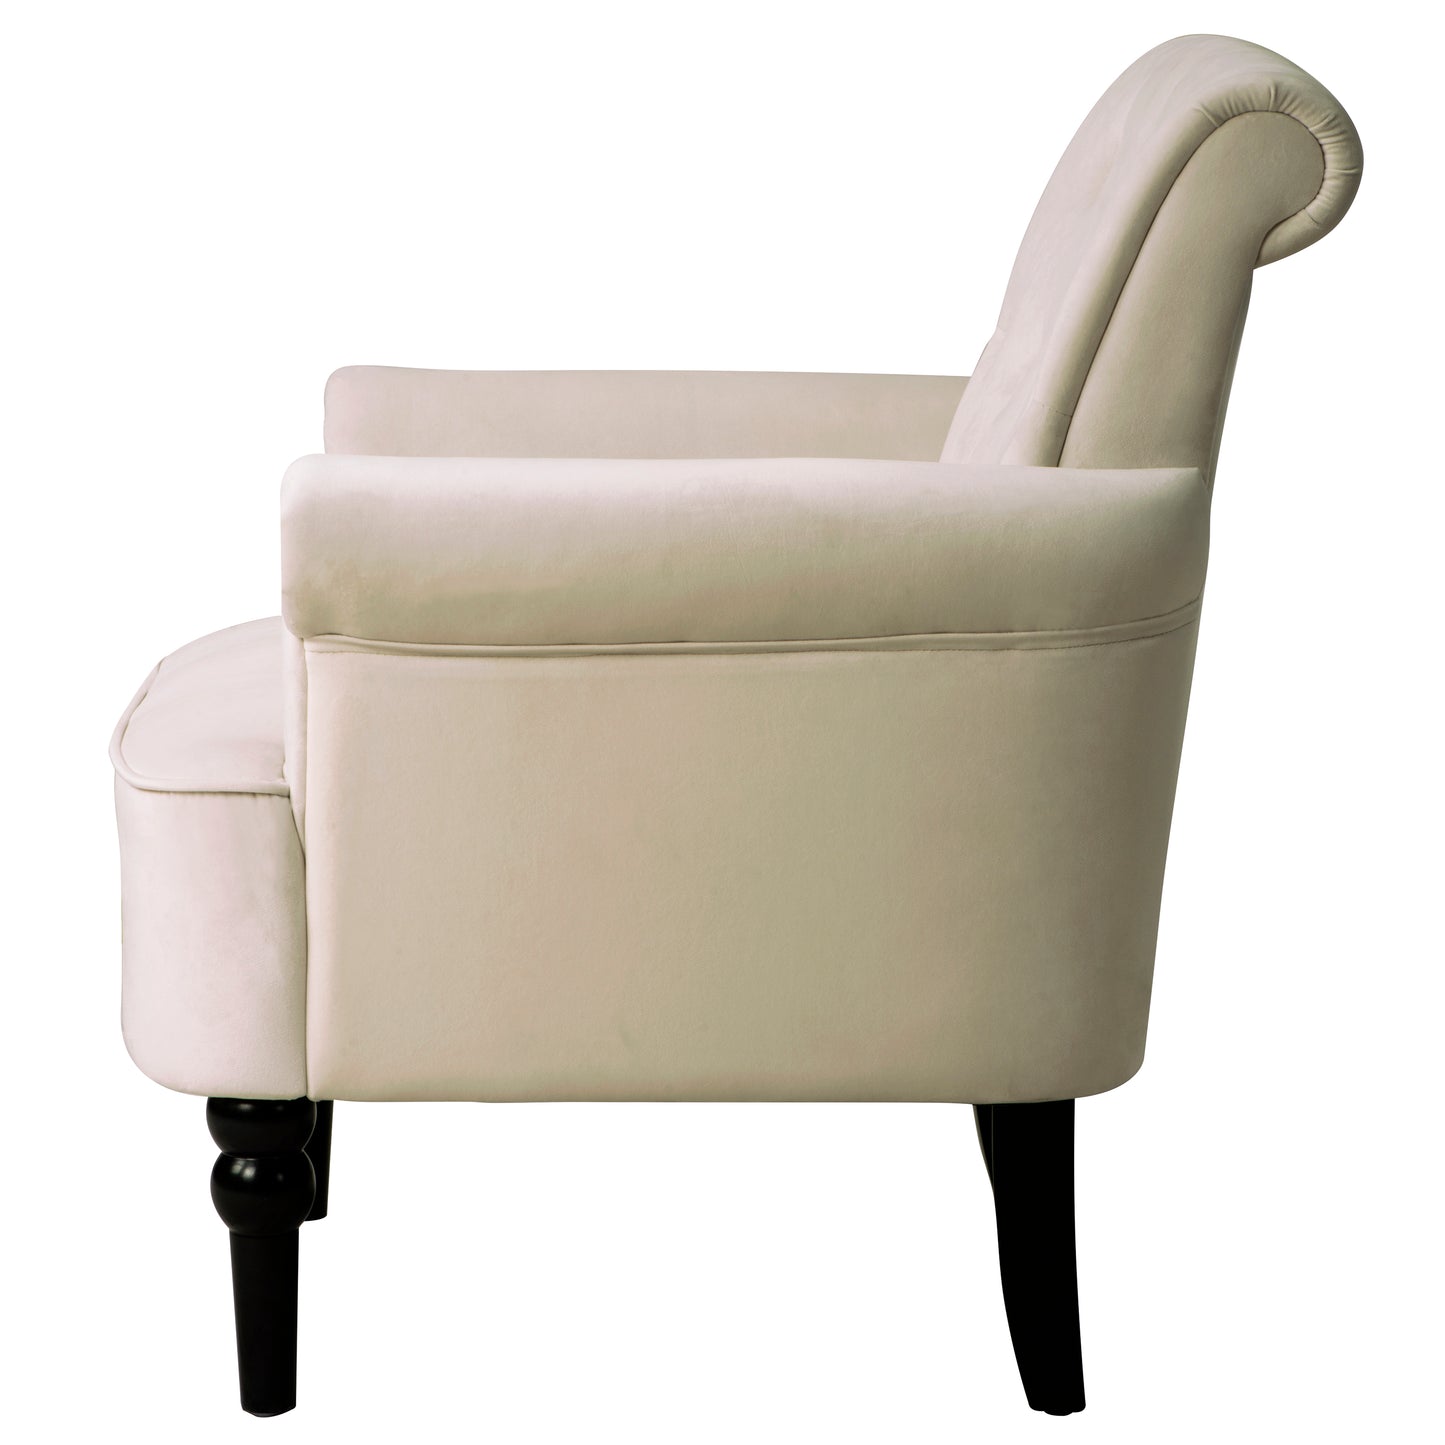 Elegant Button Tufted Club Chair Accent Armchairs Roll Arm Living Room Cushion with Wooden Legs, Off White